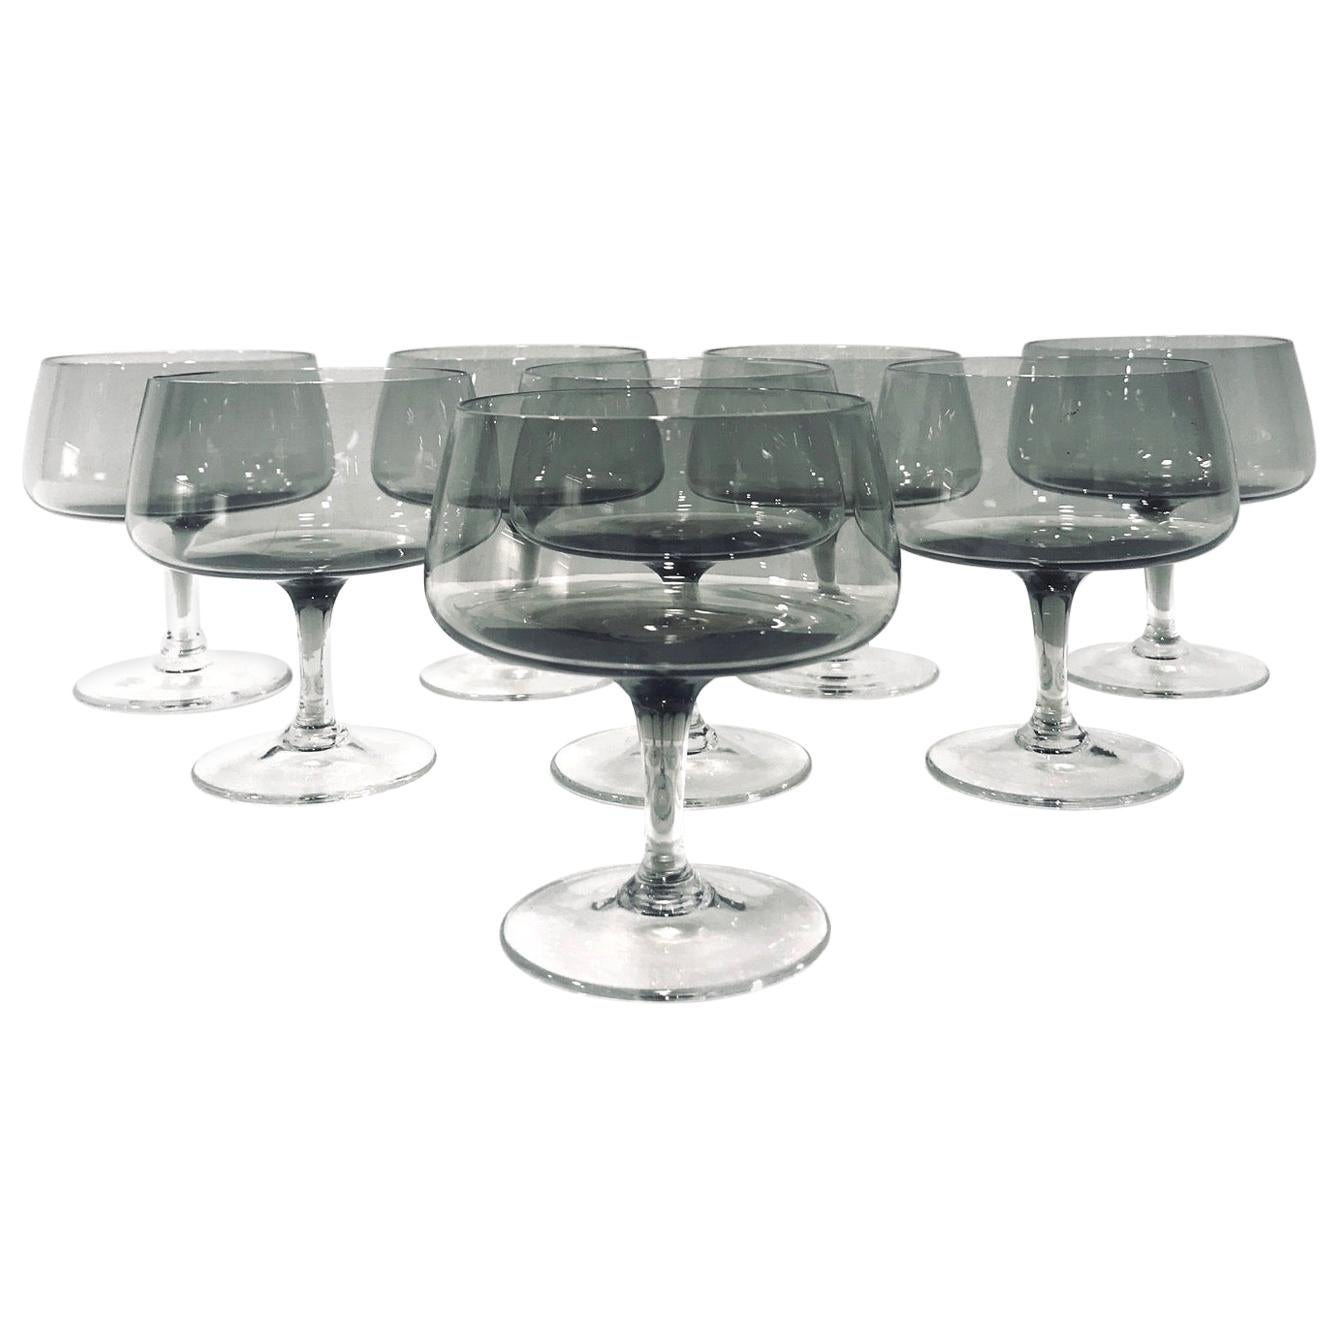 https://a.1stdibscdn.com/scandinavian-modern-champagne-glasses-in-smoked-grey-set-of-eight-circa-1960s-for-sale/1121189/f_208686721603181833869/20868672_master.jpg